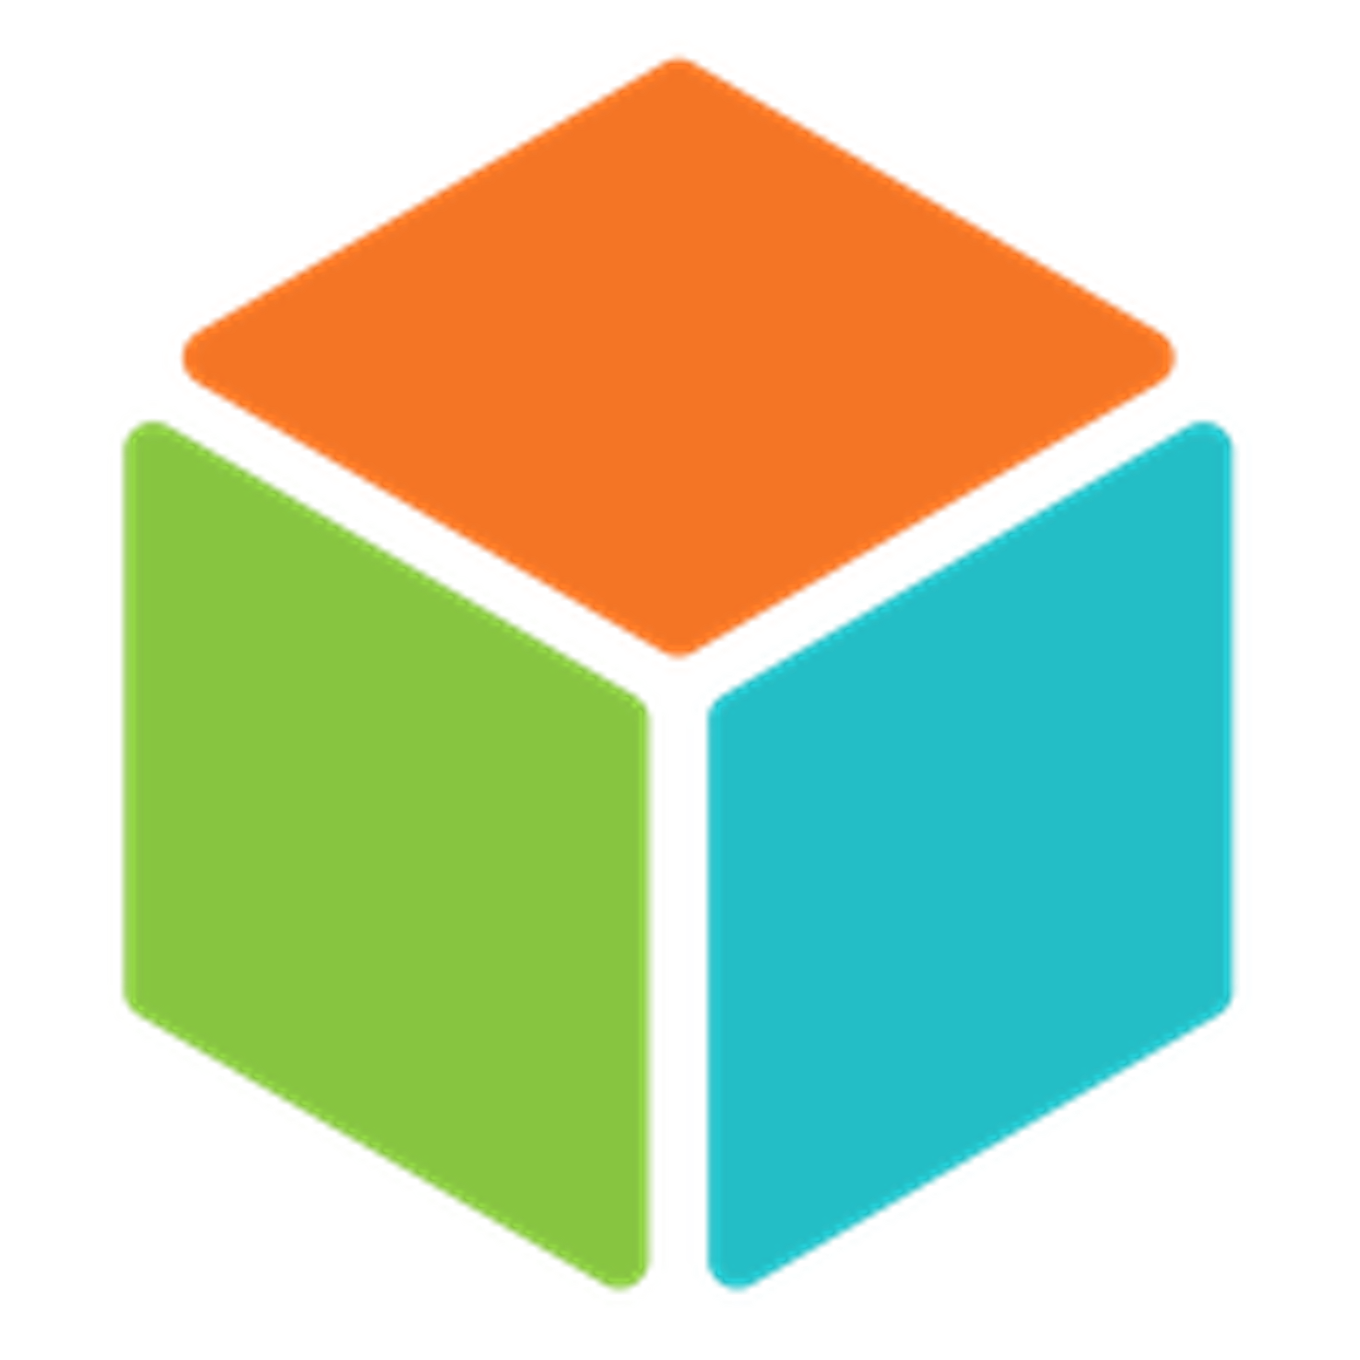 Cube with top side orange, left side green and right side blue